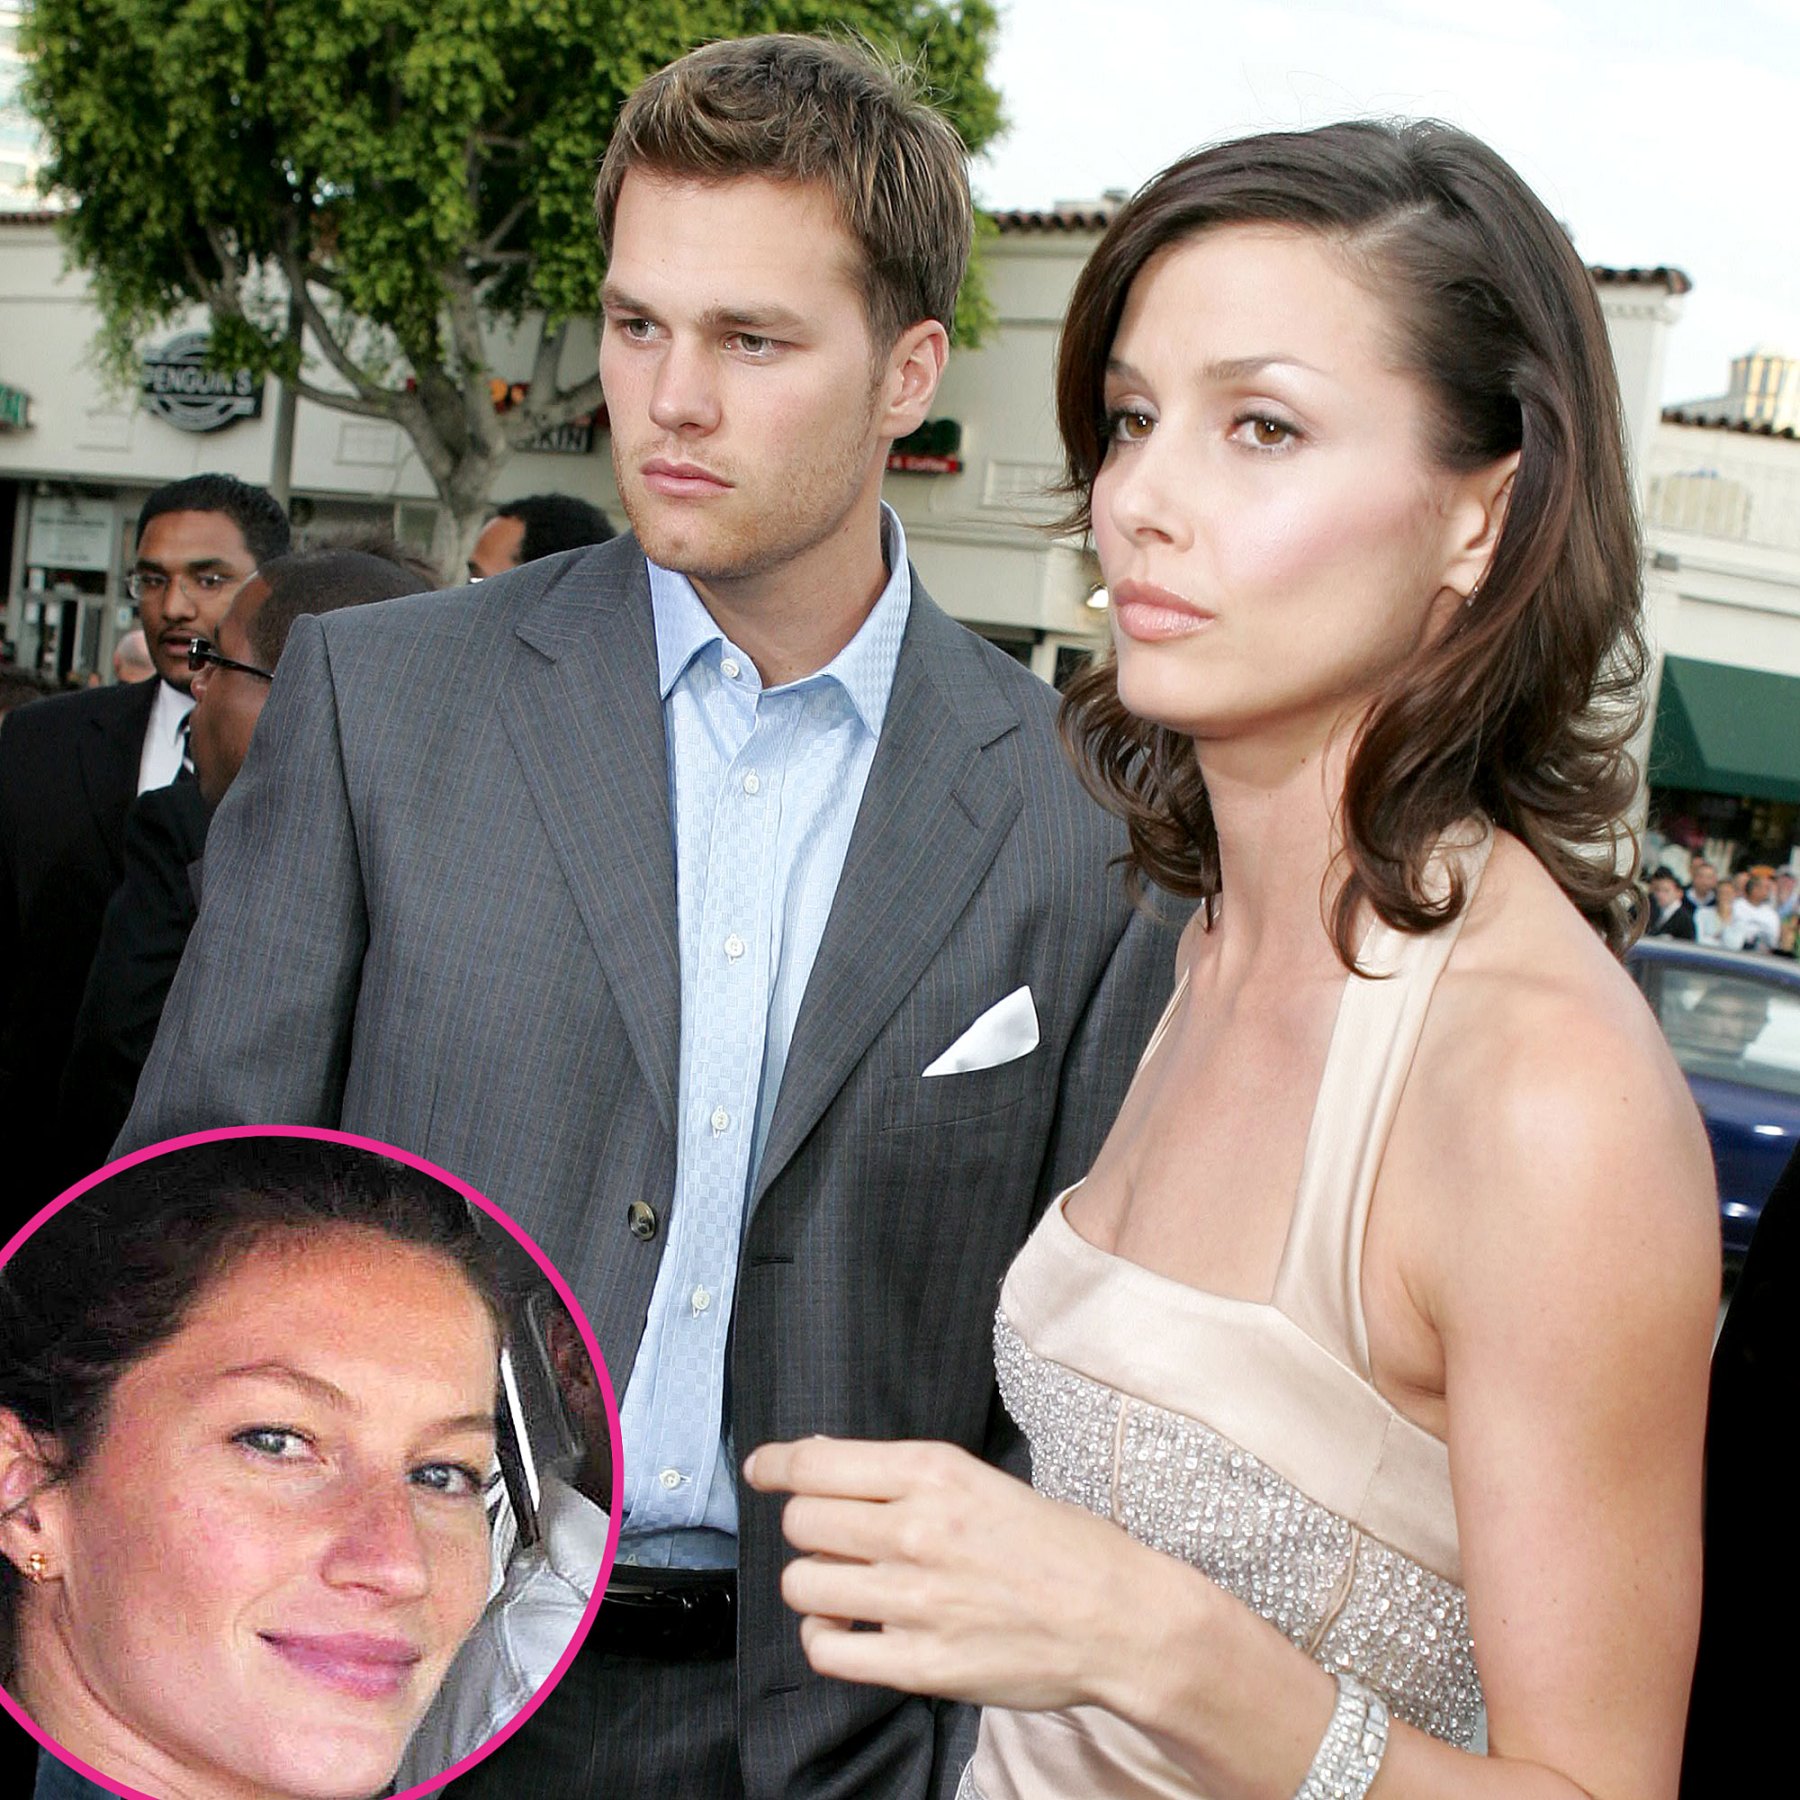 Bridget Moynahans Quotes About Her Relationship With Ex Tom Brady Us Weekly 4532